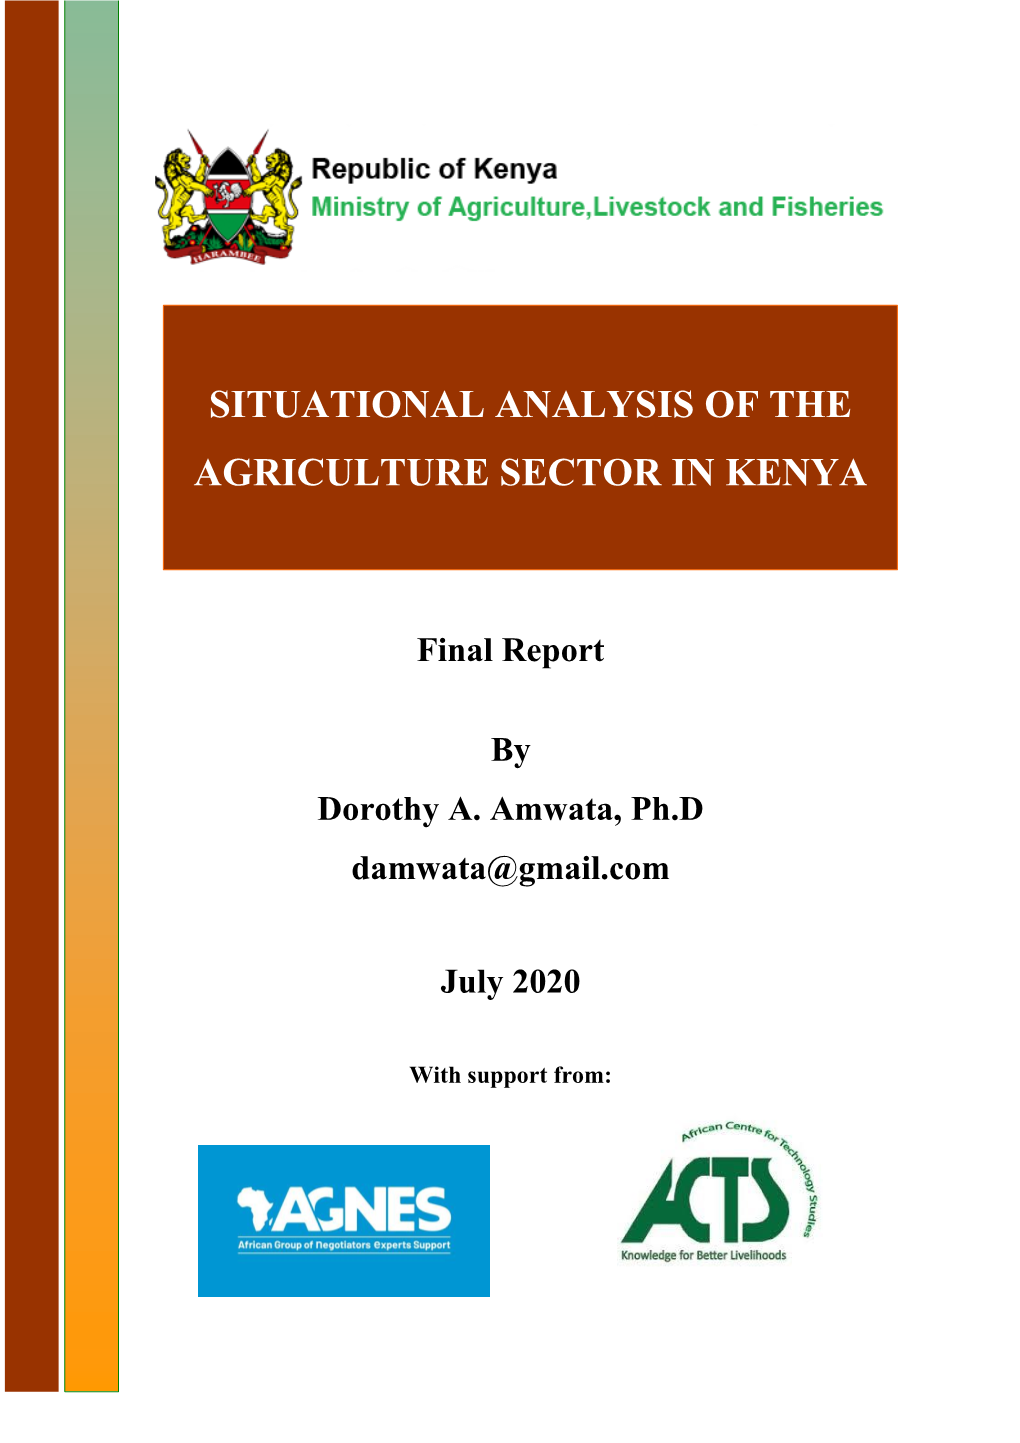 Situational Analysis of the Agriculture Sector in Kenya